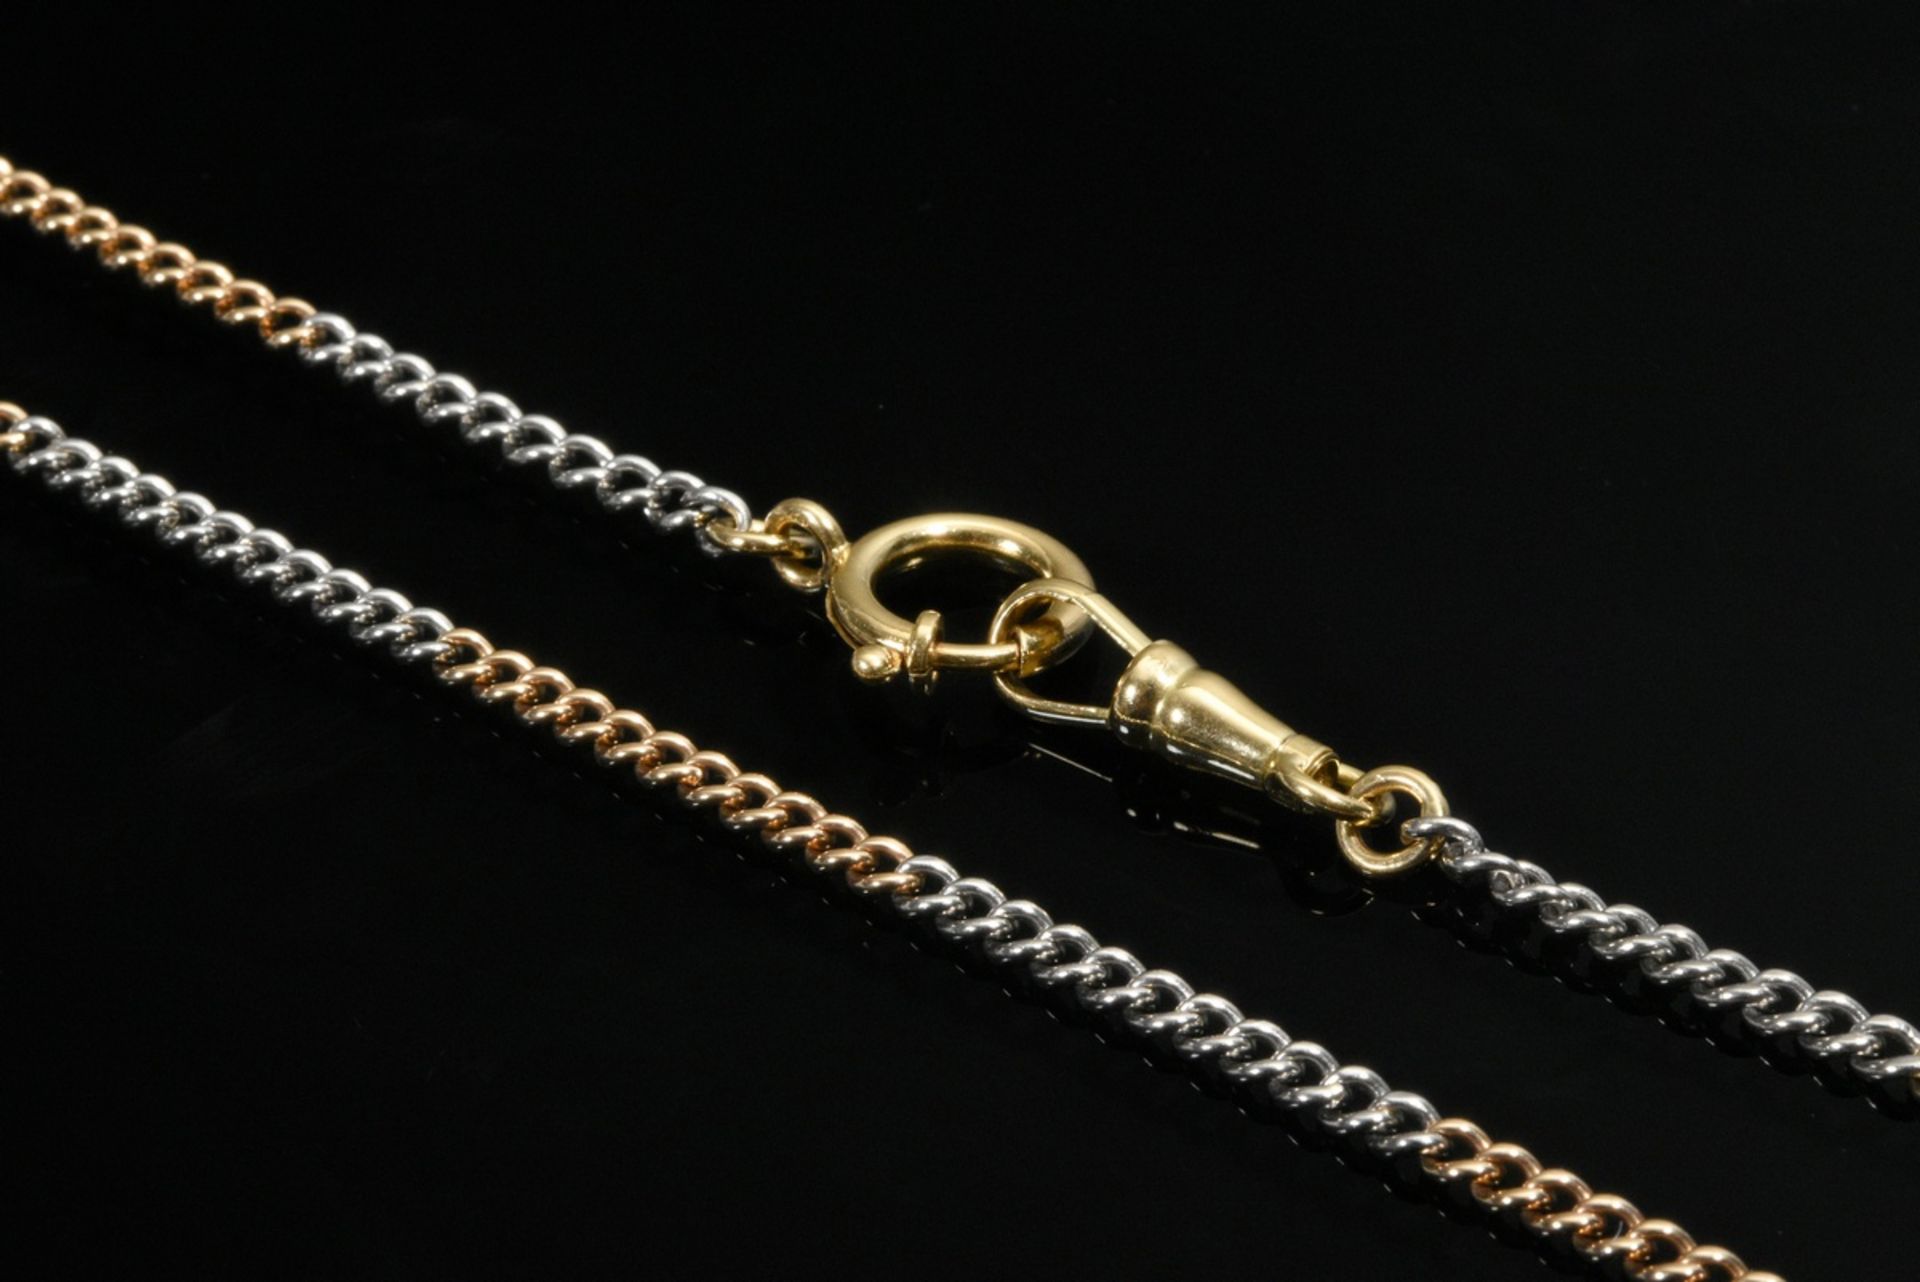 Bicolor white and yellow gold 750 round curb necklace with spring ring, 20.7g, l. 54.5cm - Image 2 of 2